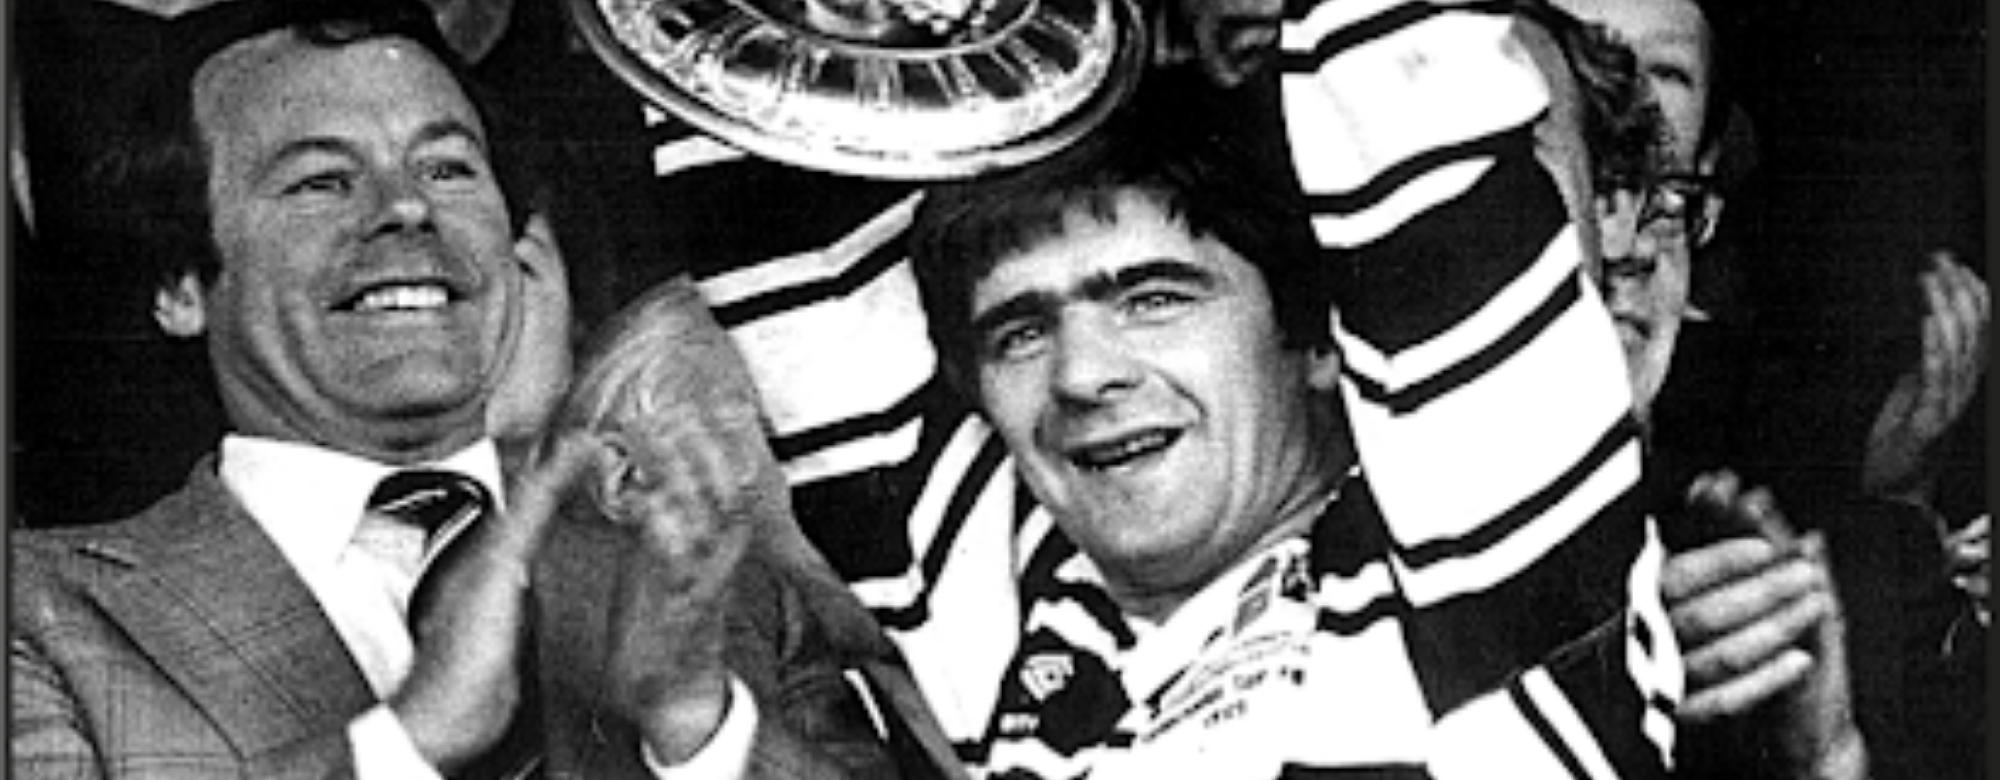 Rugby League Icons: David Topliss